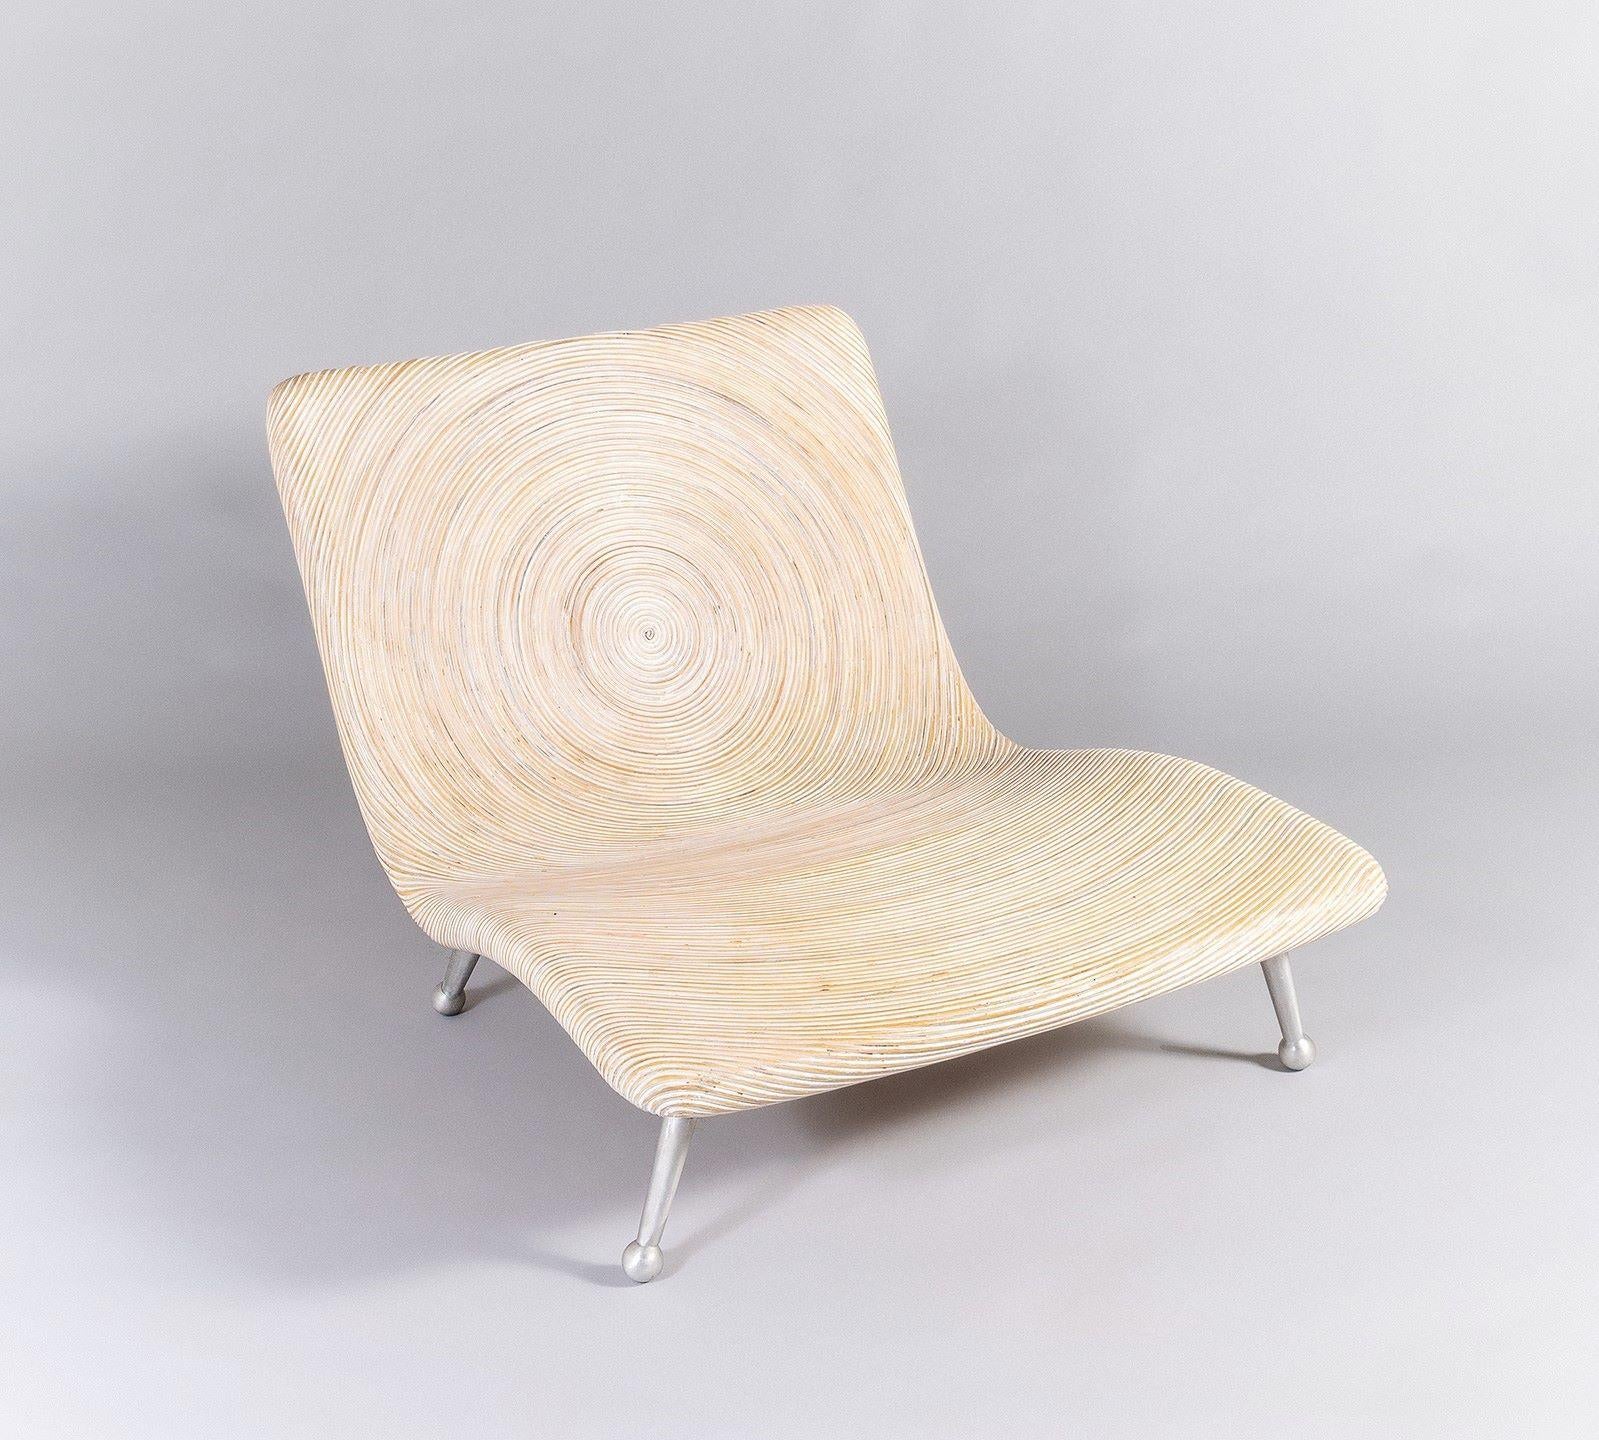 A low lounge chair designed by the famous Filipino designer Clayton Tugonon for Snug, the ‘Coconut’ chair is made from sustainably sourced eco friendly materials.
A  very stylish, unique design, made from salvaged coconut stems, sea shells and